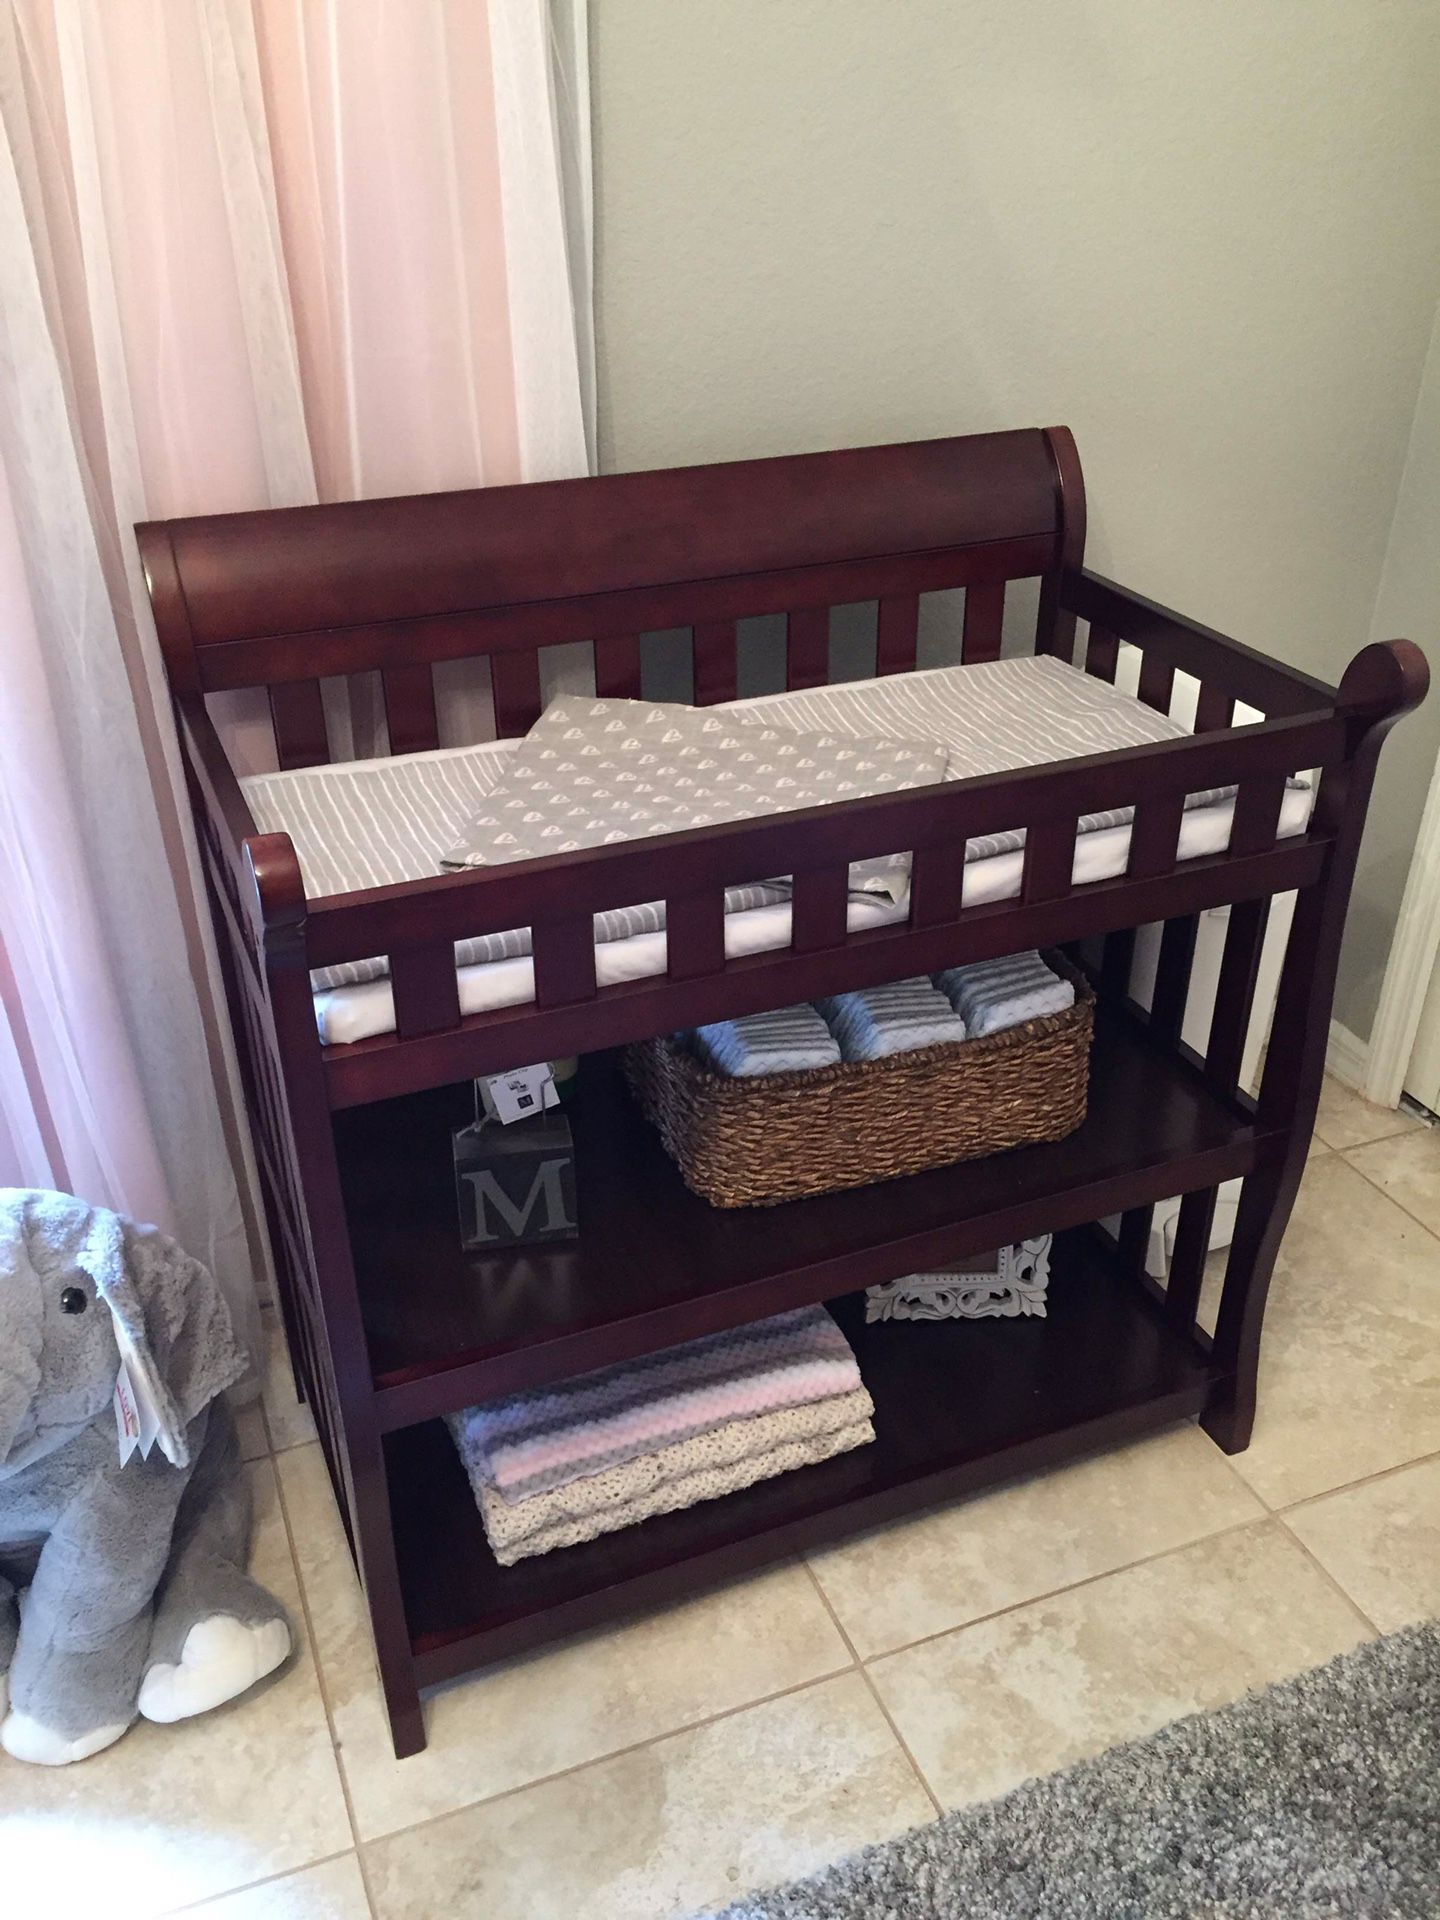 Diaper Changing Table - Like New, Rarely Used